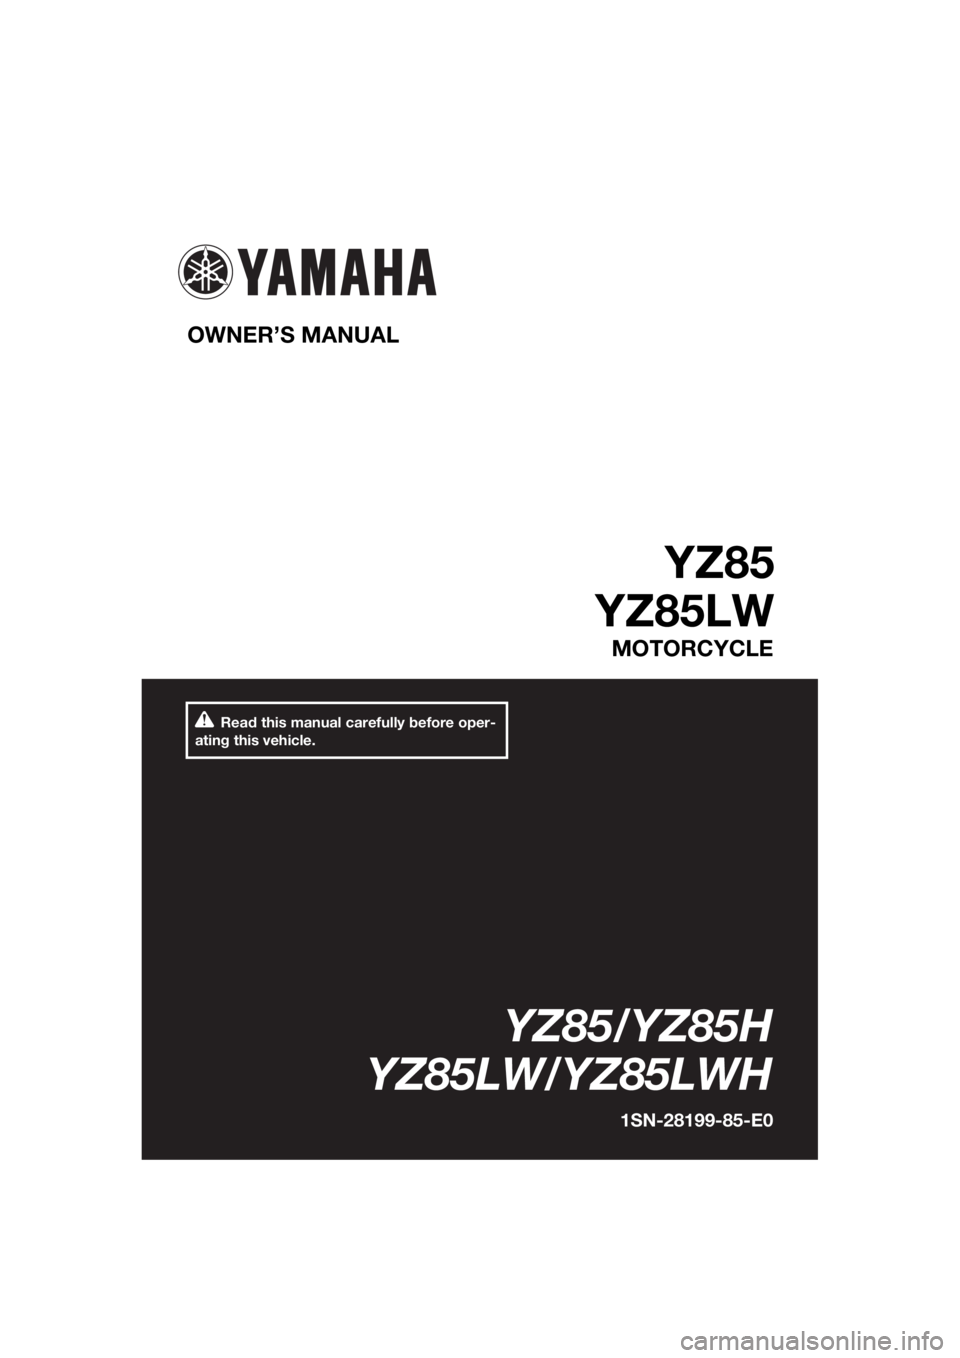 YAMAHA YZ85 2017  Owners Manual Read this manual carefully before oper-
ating this vehicle.
OWNER’S MANUAL 
YZ85
YZ85LW
MOTORCYCLE
YZ85/YZ85H
YZ85LW/YZ85LWH
1SN-28199-85-E0
U1SN85E0.book  Page 1  Friday, June 10, 2016  1:20 PM 